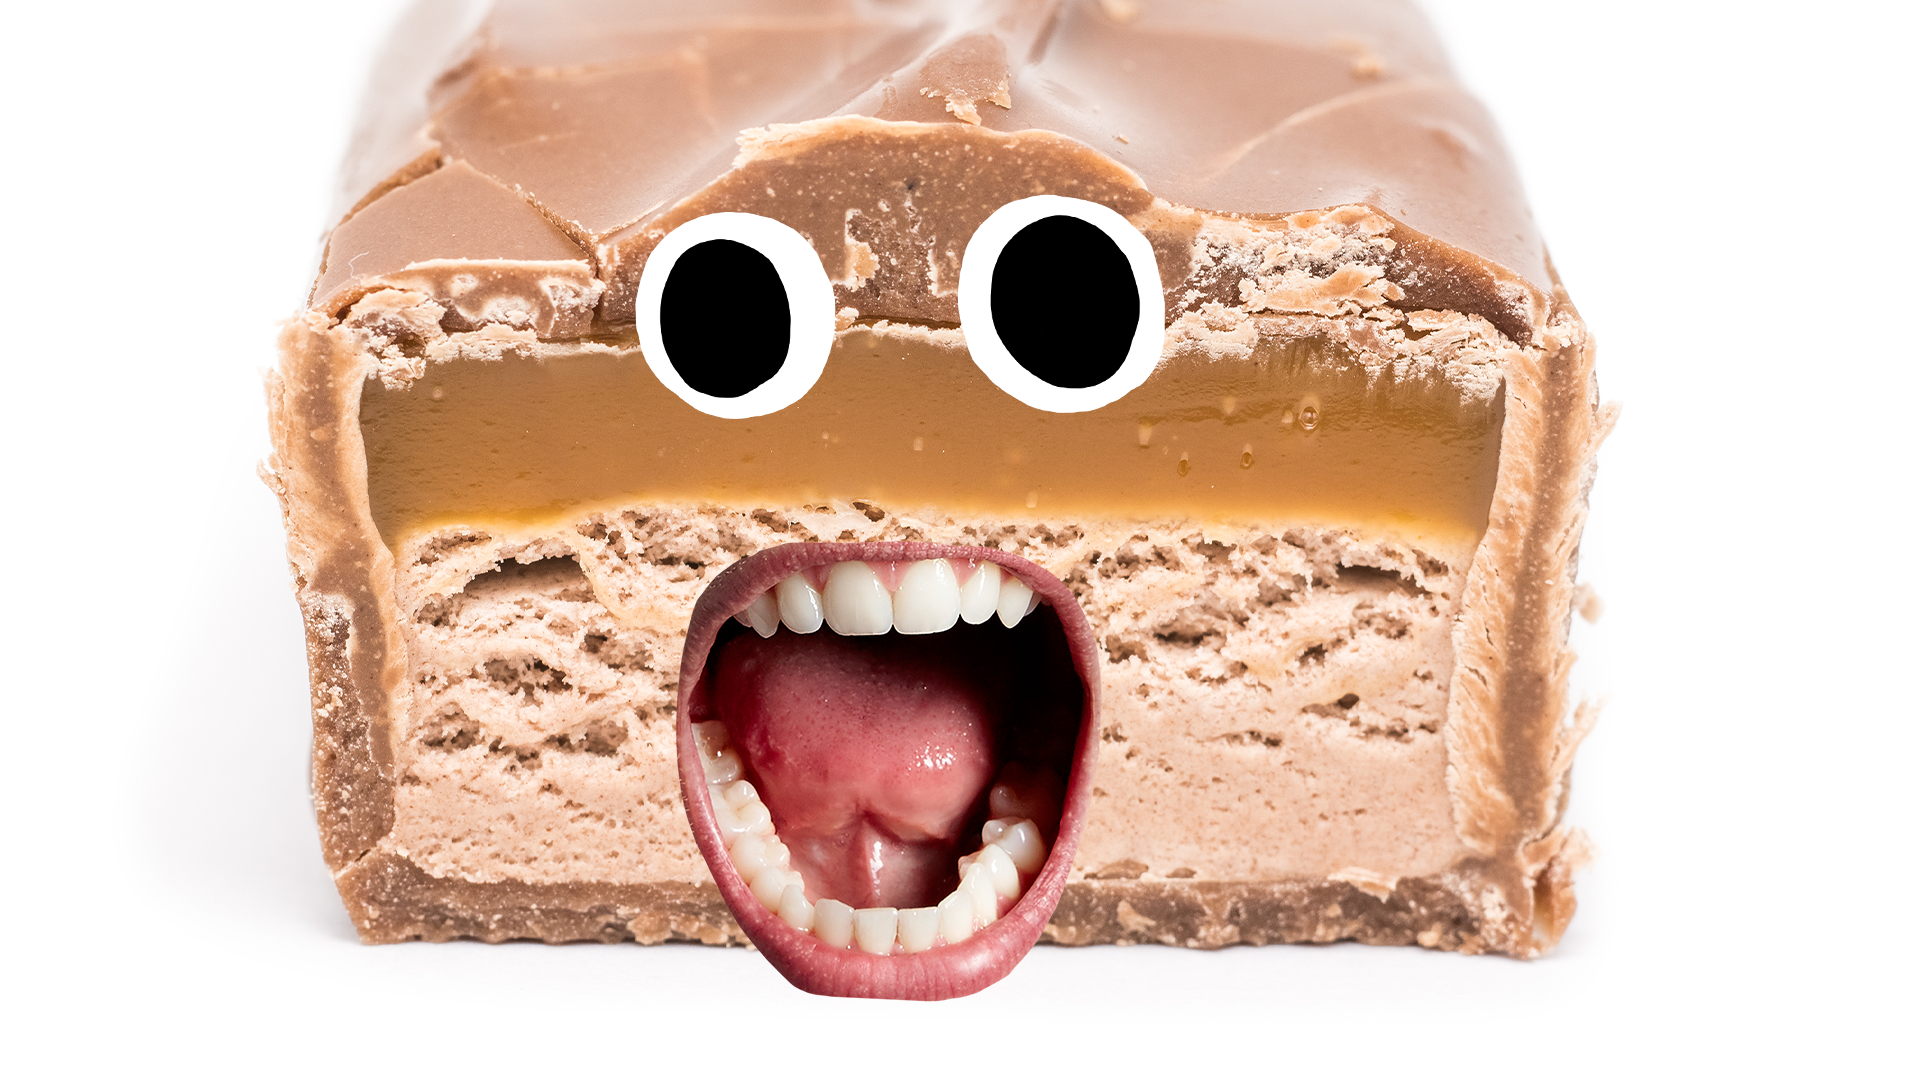 Mars bar with goofy face on white background 